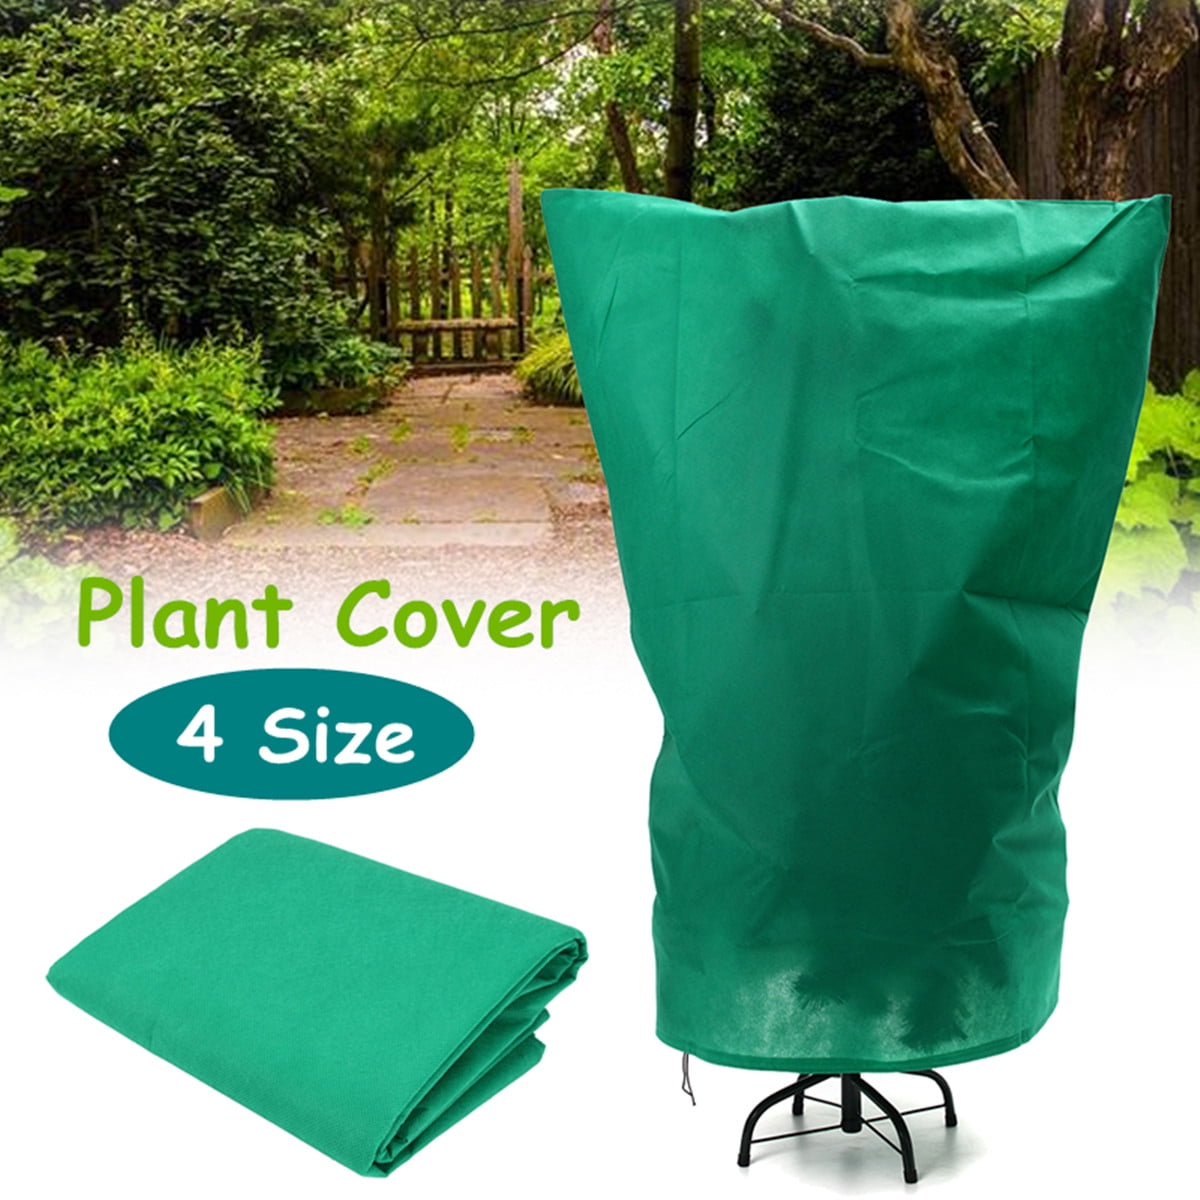 Details about   3pcs Warm Cover Tree Shrub Plant Protect Bag Frost Protection Yard Garden Winter